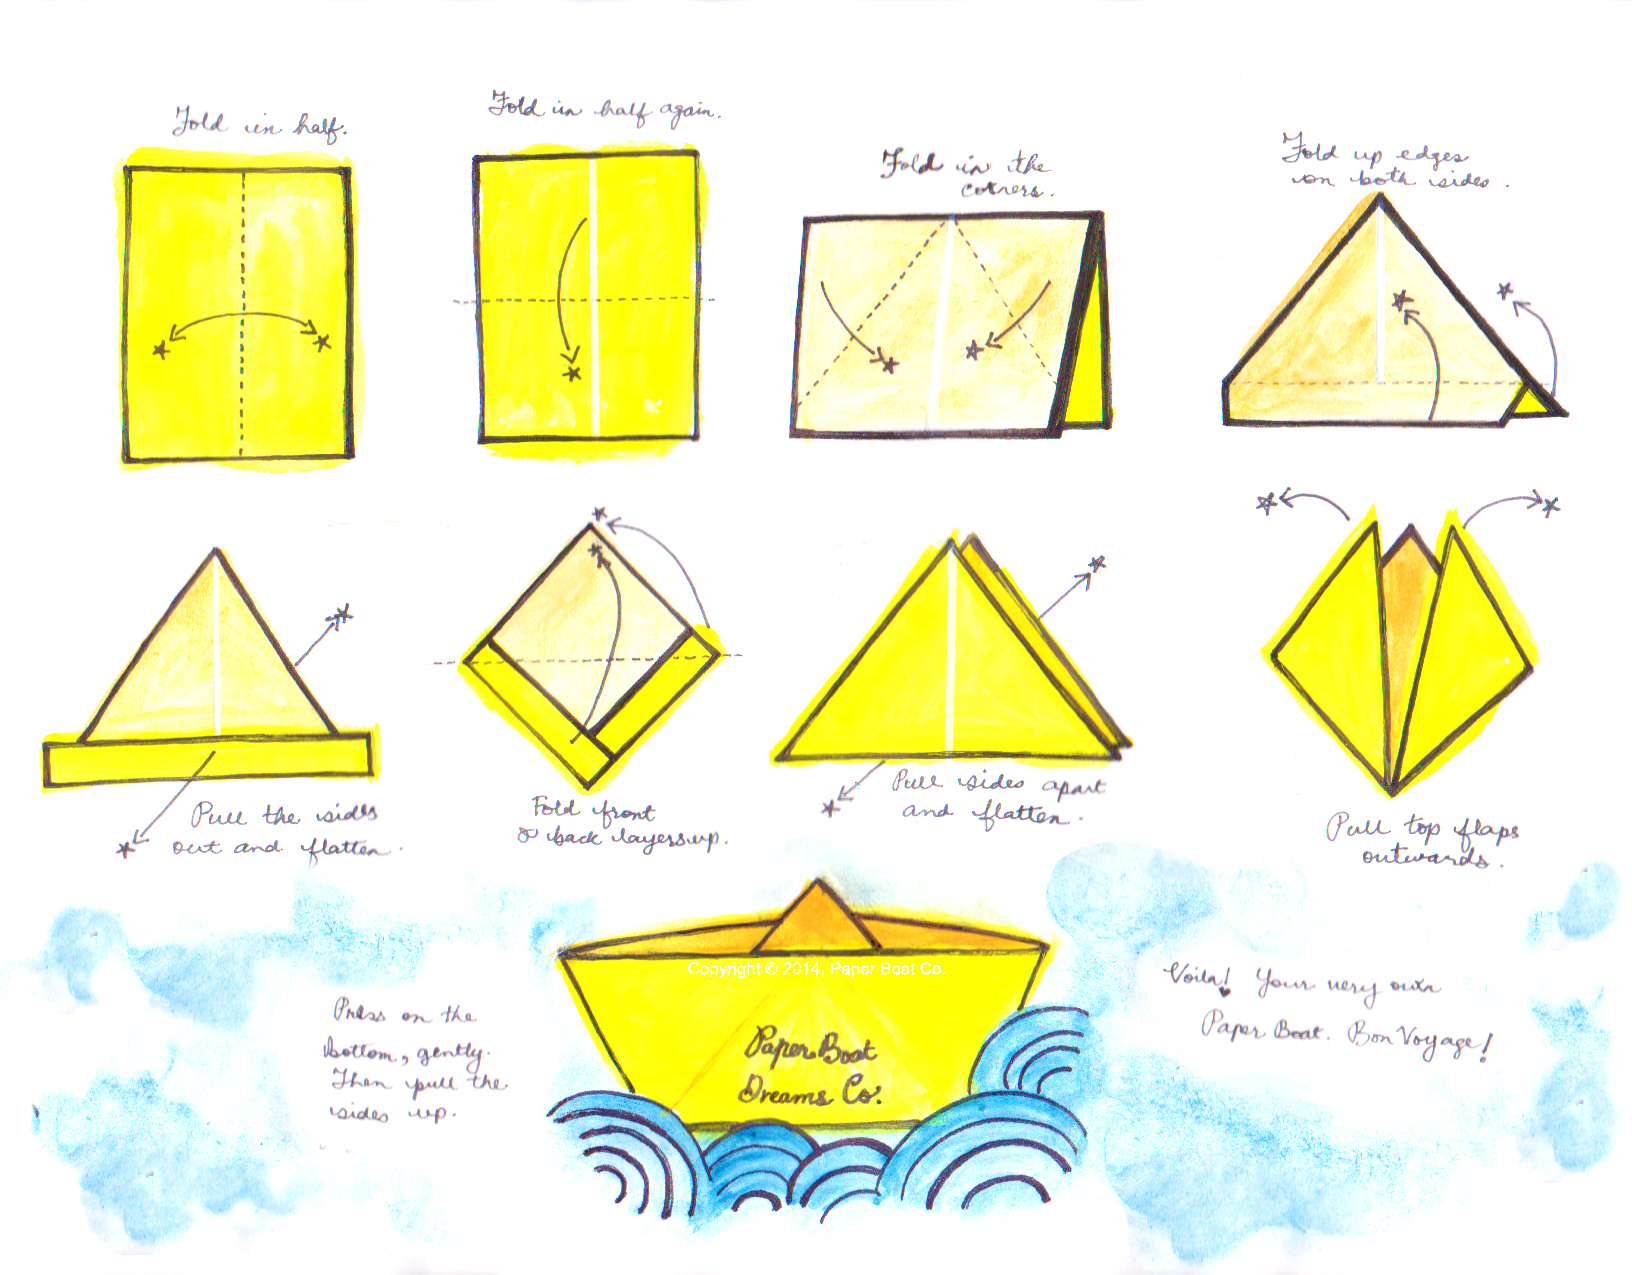 How to Make Paper Boat - Origami Boat Instruction